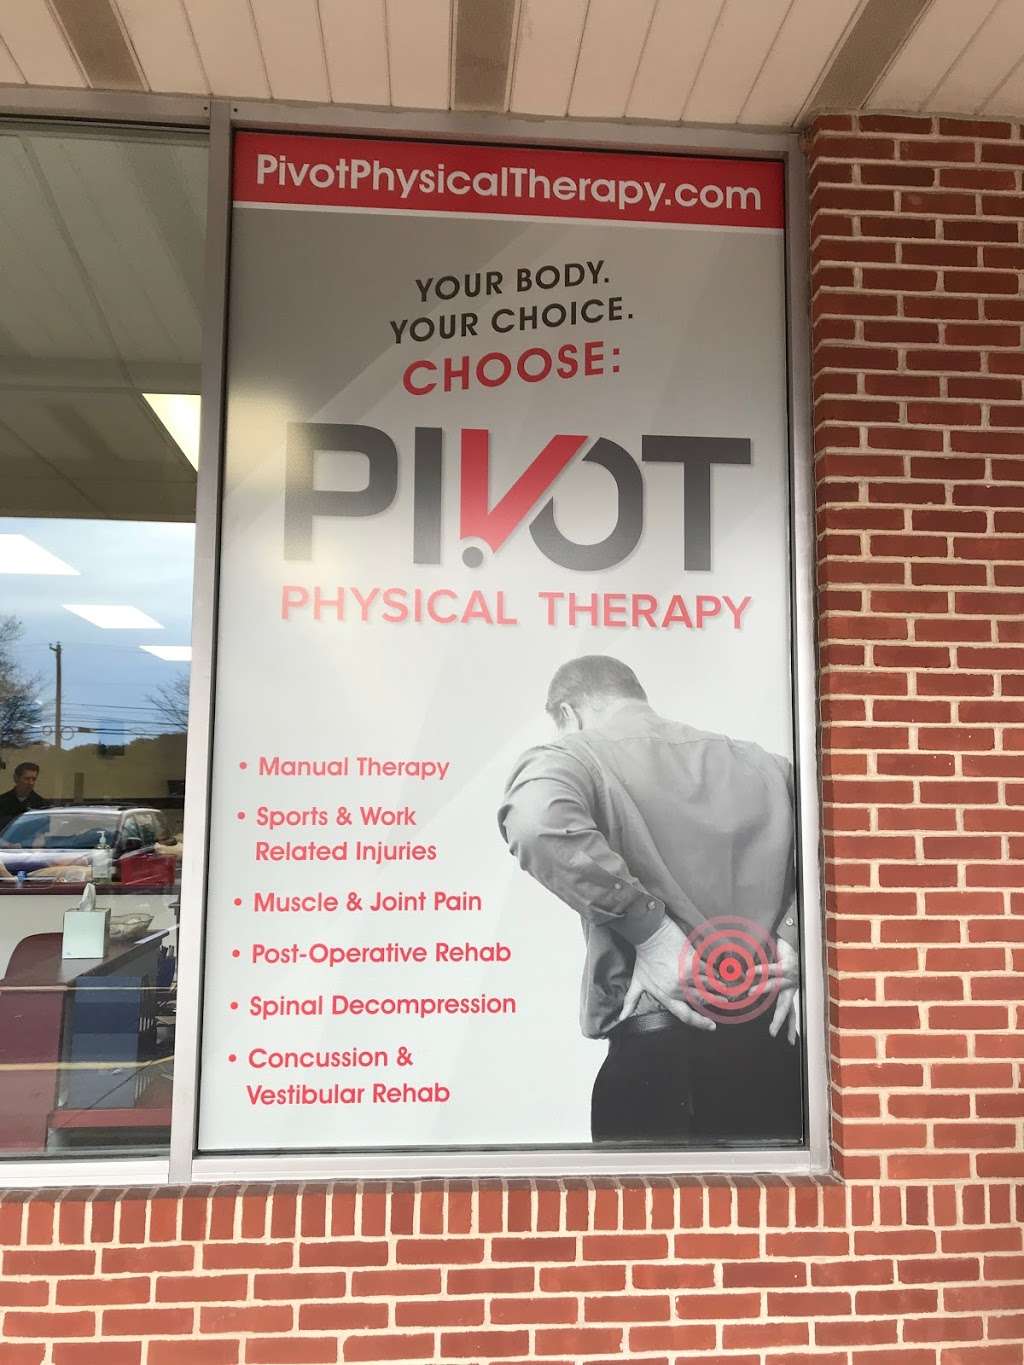 Pivot Physical Therapy | Allen-Forge Shopping Center, 850 South Valley Forge Road Af-2/D, Lansdale, PA 19446, USA | Phone: (267) 649-7658